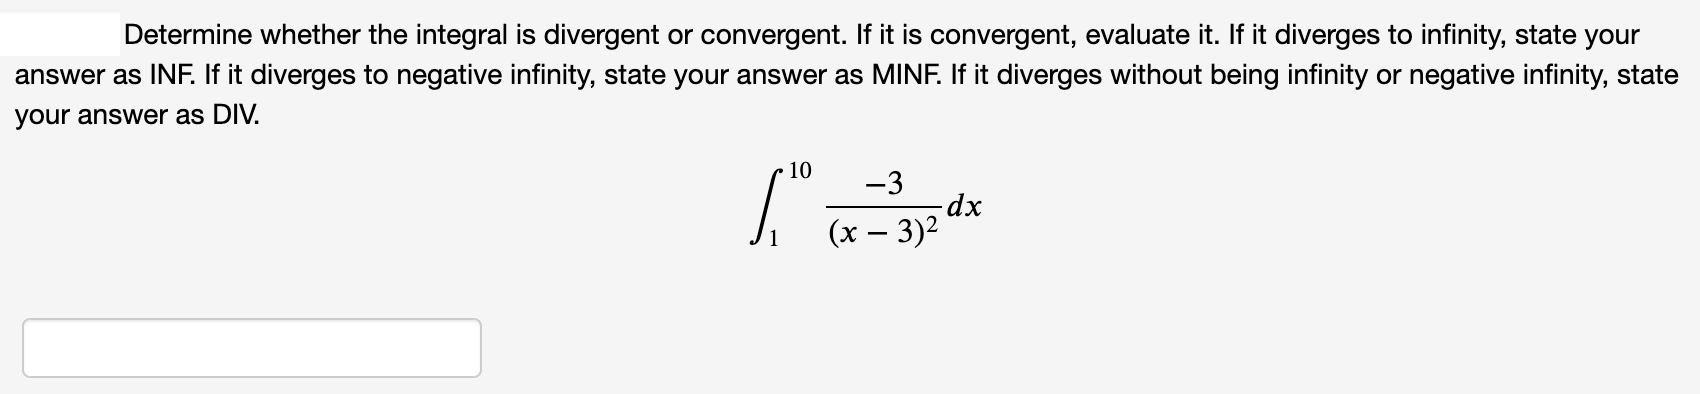 Determine whether the integral is divergent or convergent. If it is convergent, evaluate it. If it diverges to infinity, state your
swer as INF. If it diverges to negative infinity, state your answer as MINF. If it diverges without being infinity or negative infinity, state
ur answer as DIV.
10
-3
(х — 3)2
